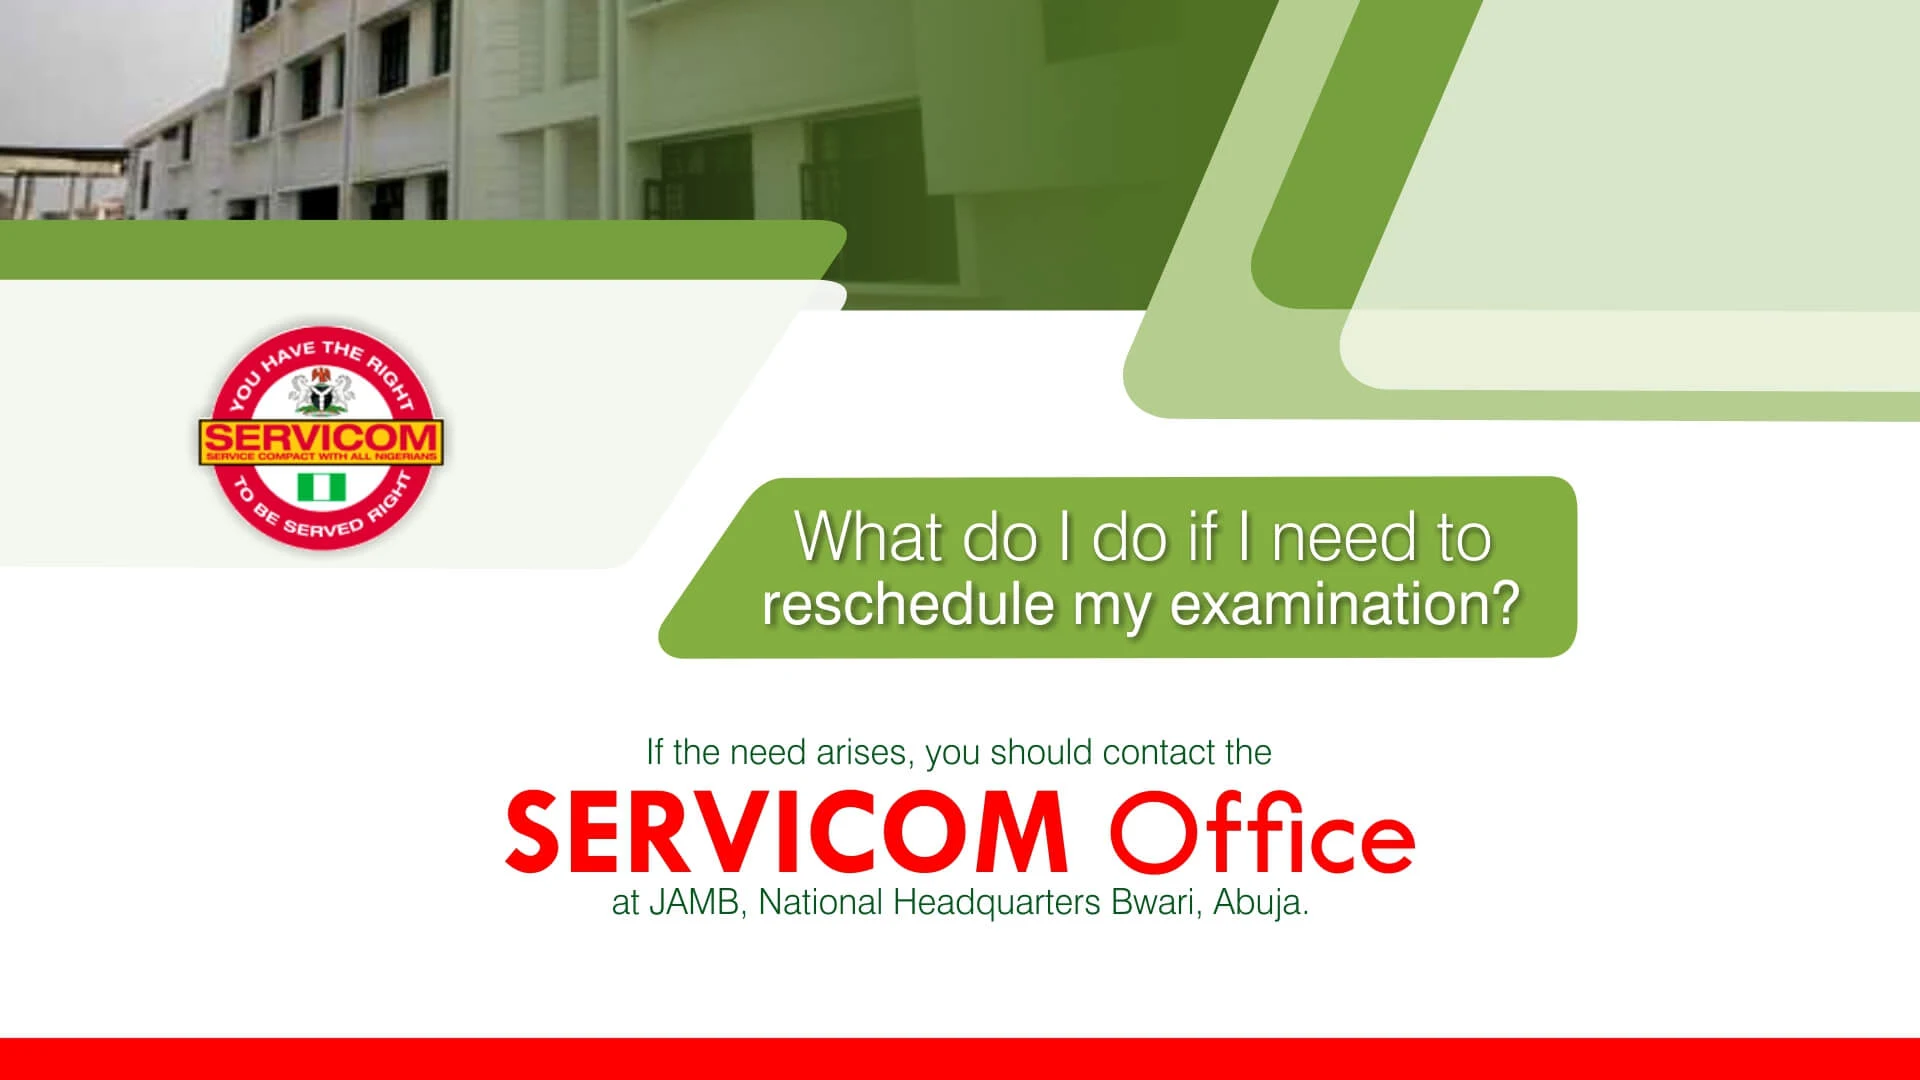 22. What do I do if I need to reschedule my JAMB examination?